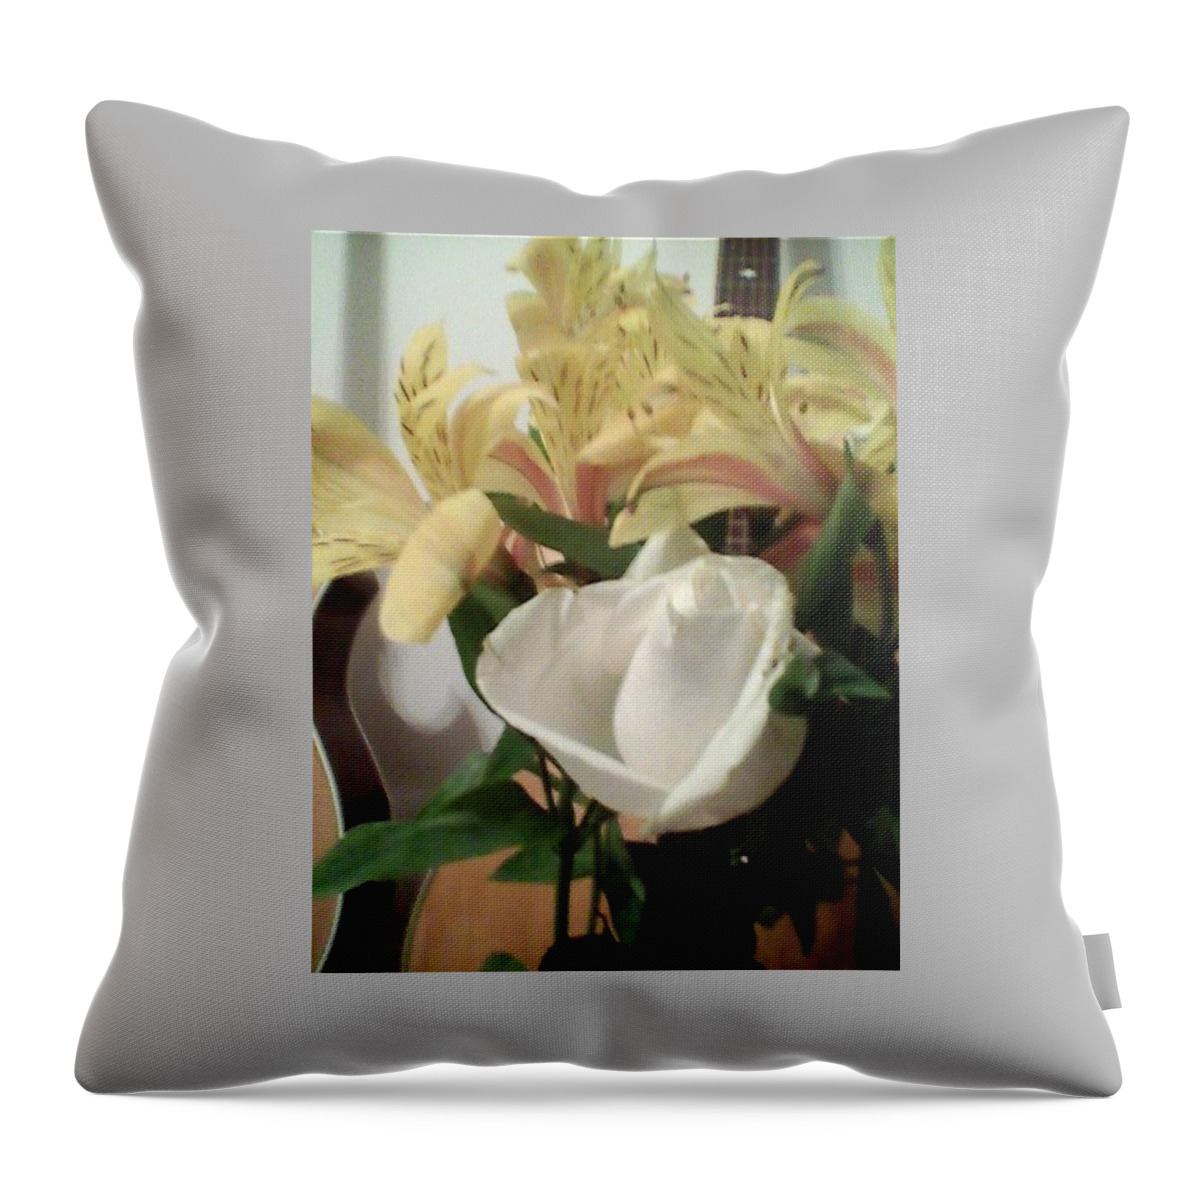 White Rose Throw Pillow featuring the photograph Flowery Notes by Suzanne Berthier